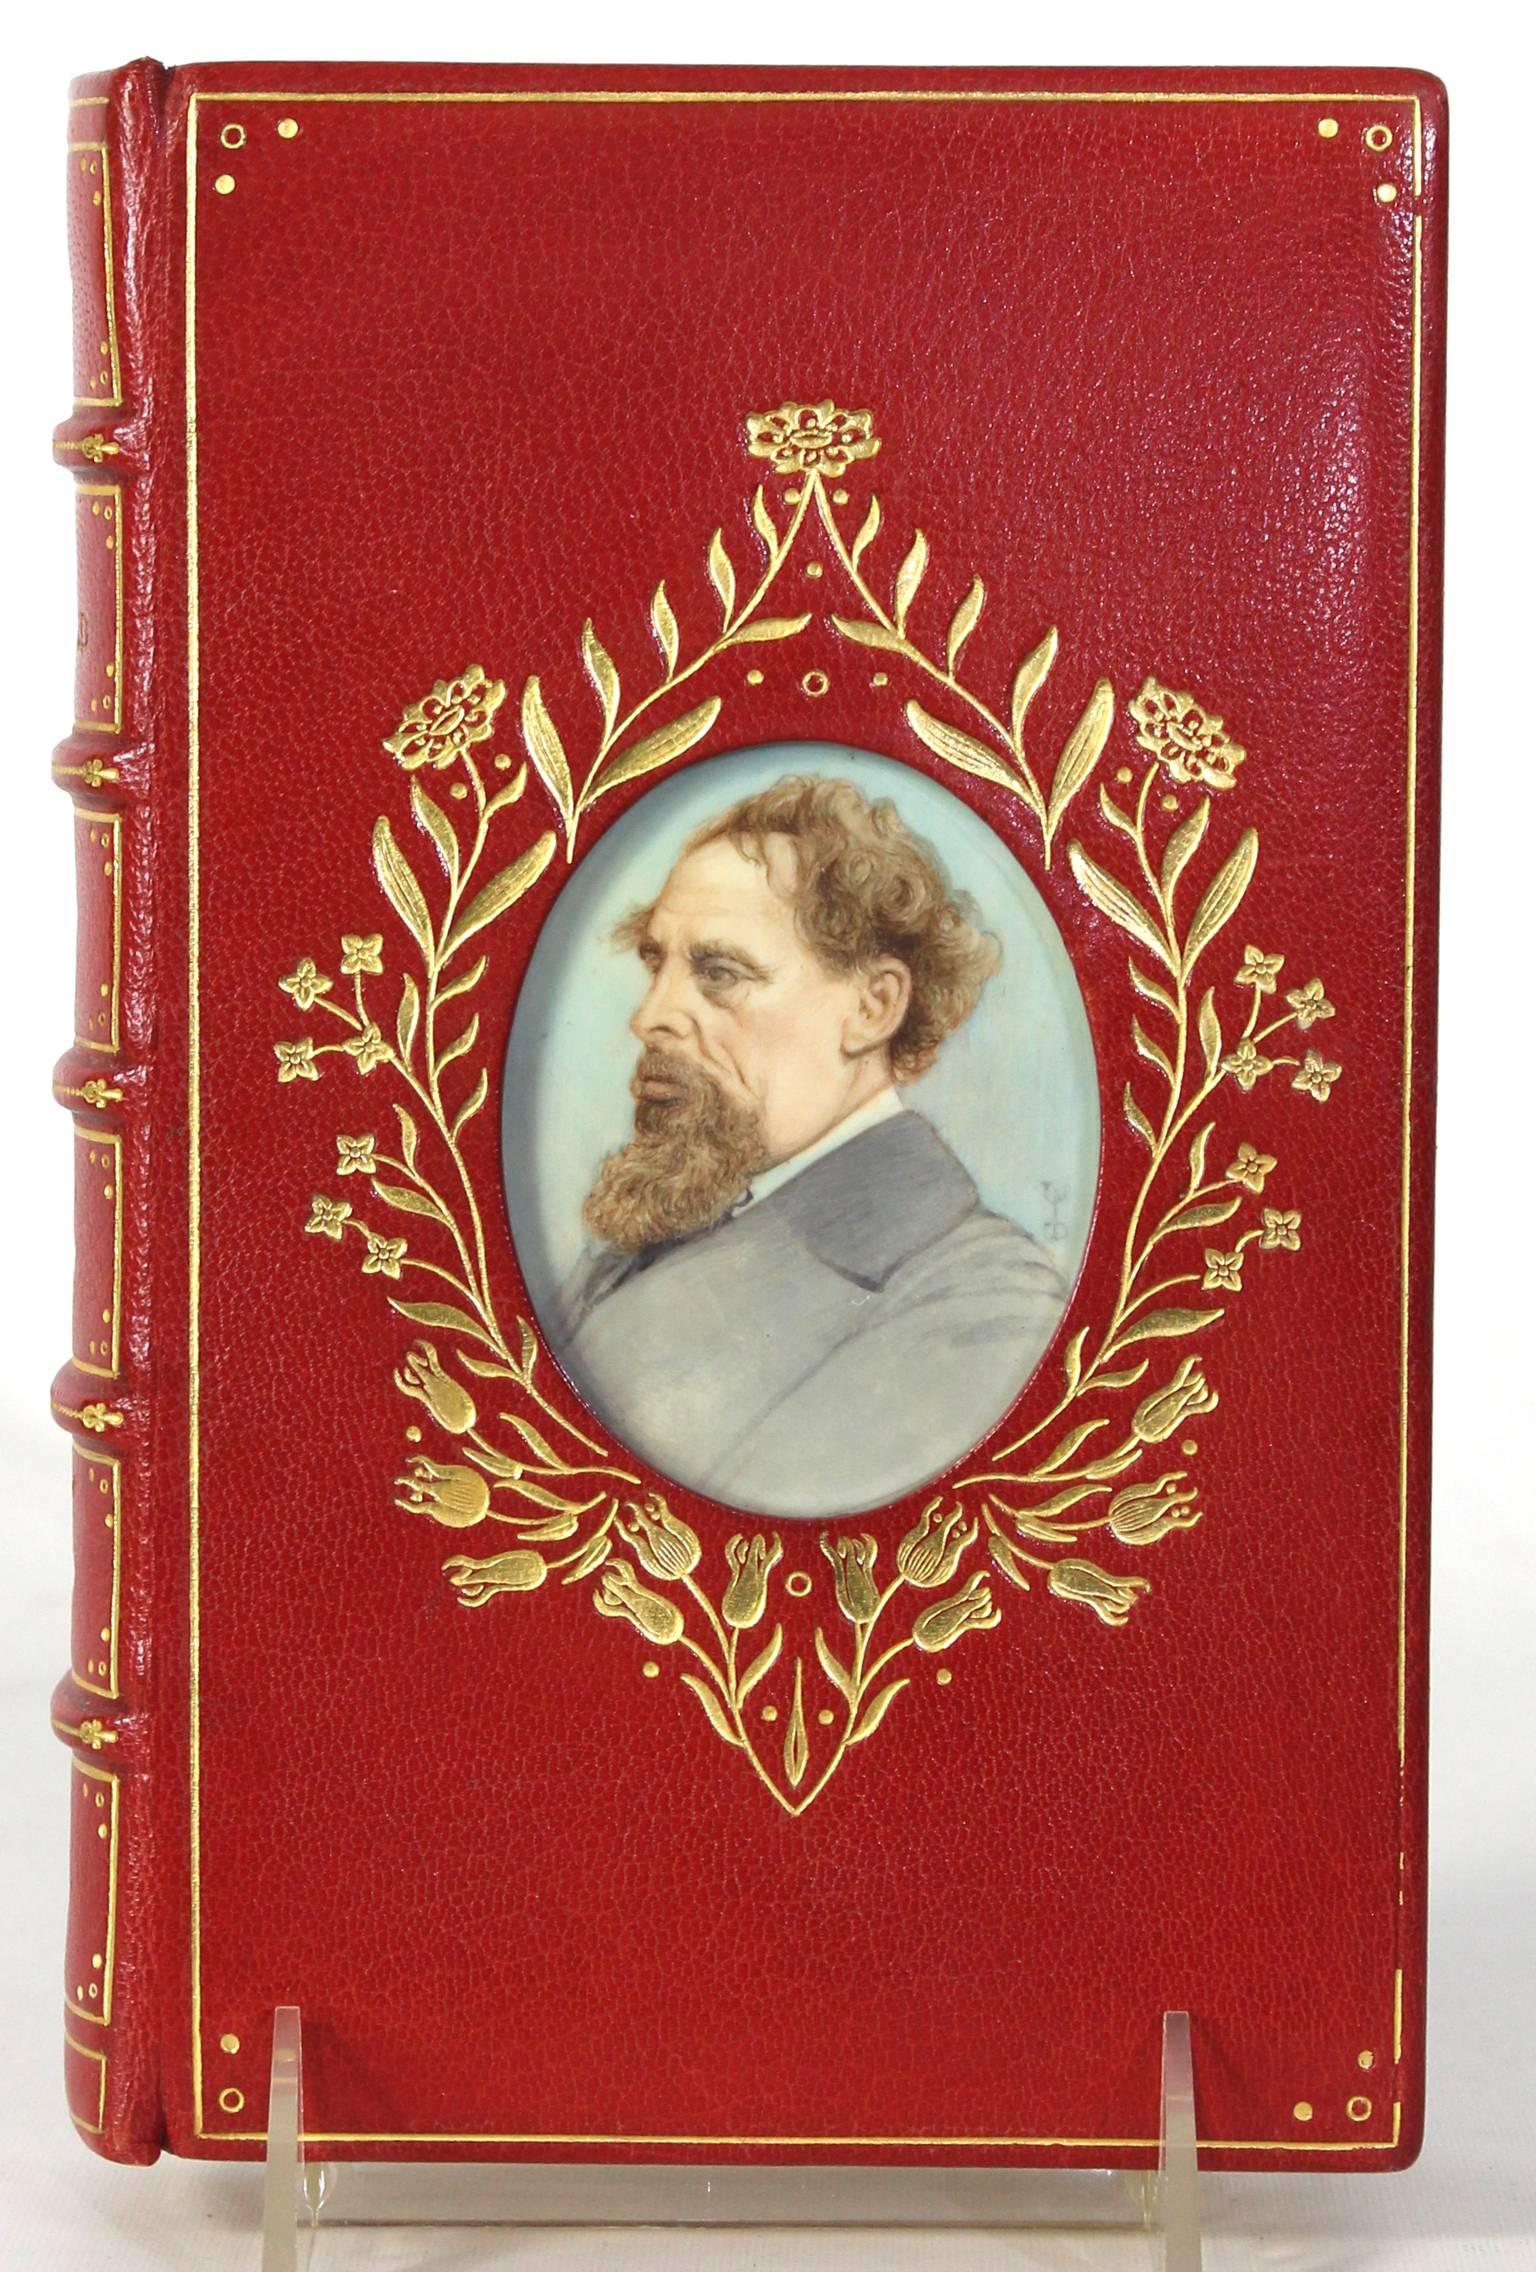 A spectacular first edition David Copperfield by Charles Dickens in fine red leather cosway binding inset with hand-painted portrait miniature of the author.